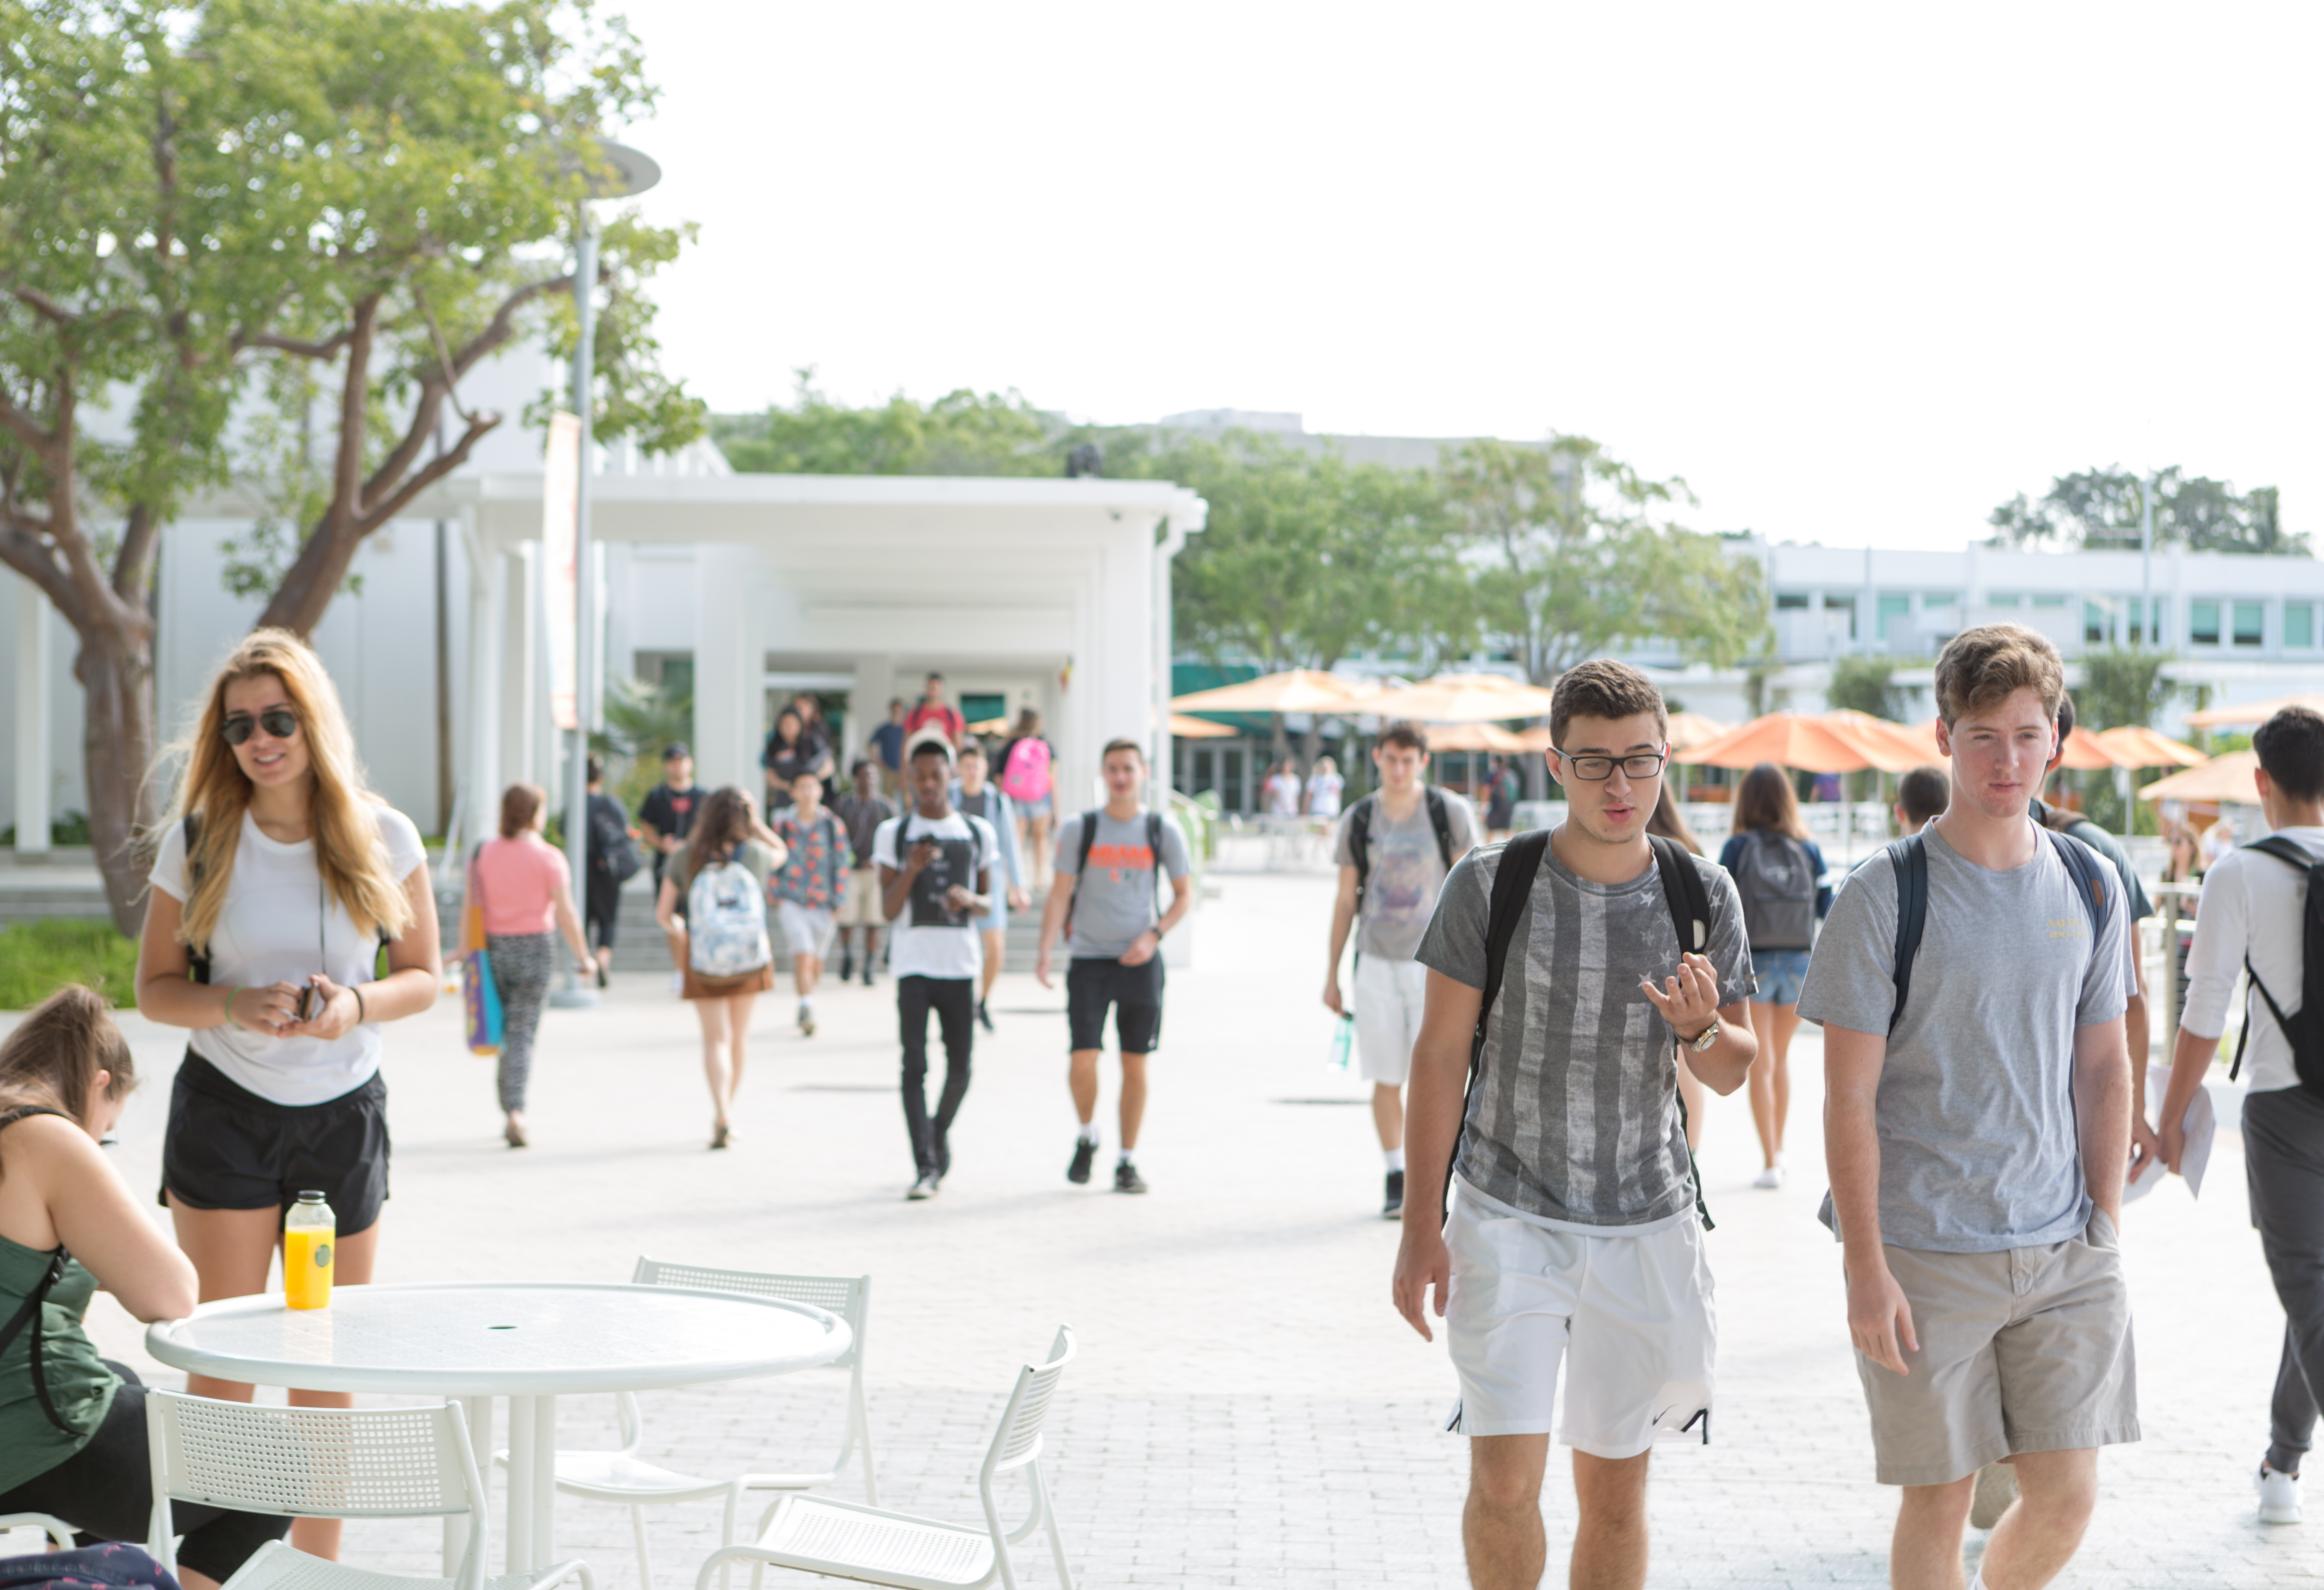 Students walking on the University of Miami campus.